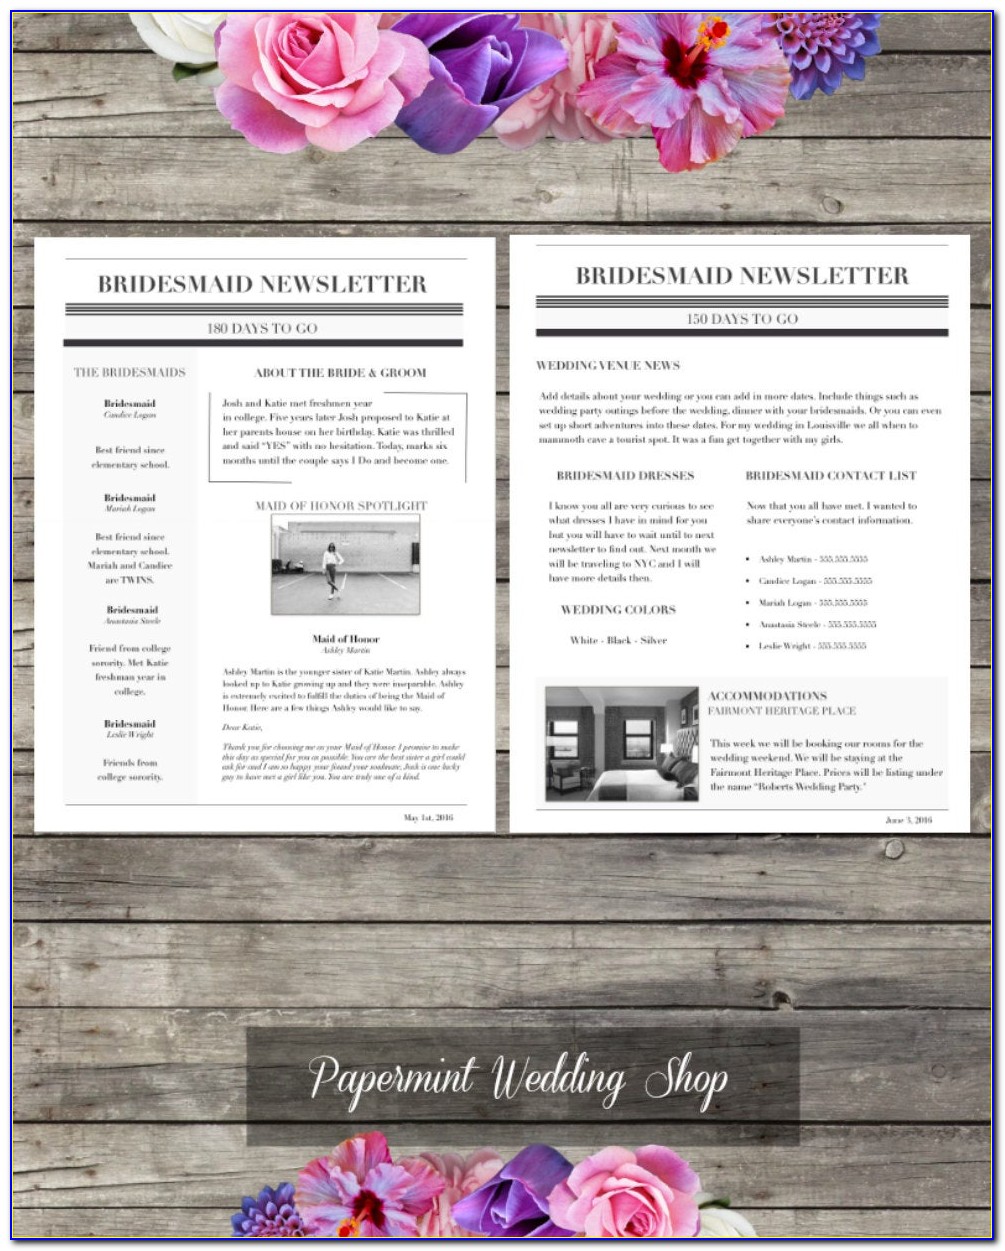 Bridesmaid Newsletter Template Download